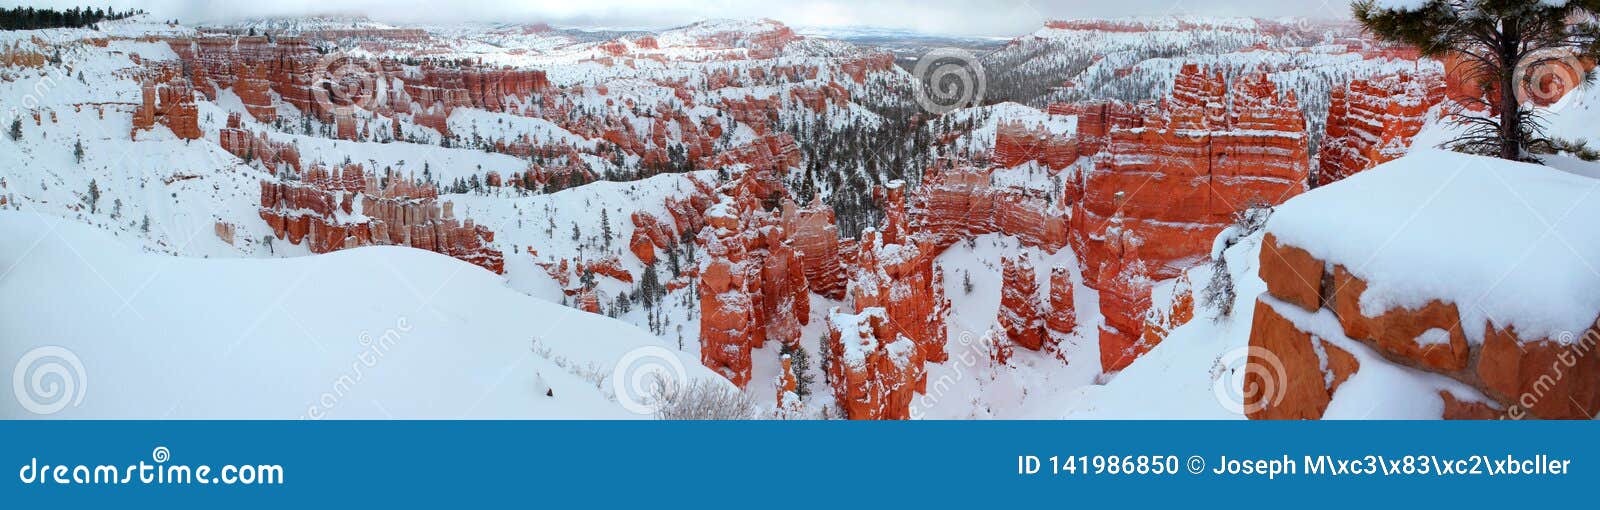 beautiful panoramic view of bryce canyon nationalpark with snow in winter with red rocks / utah / usa